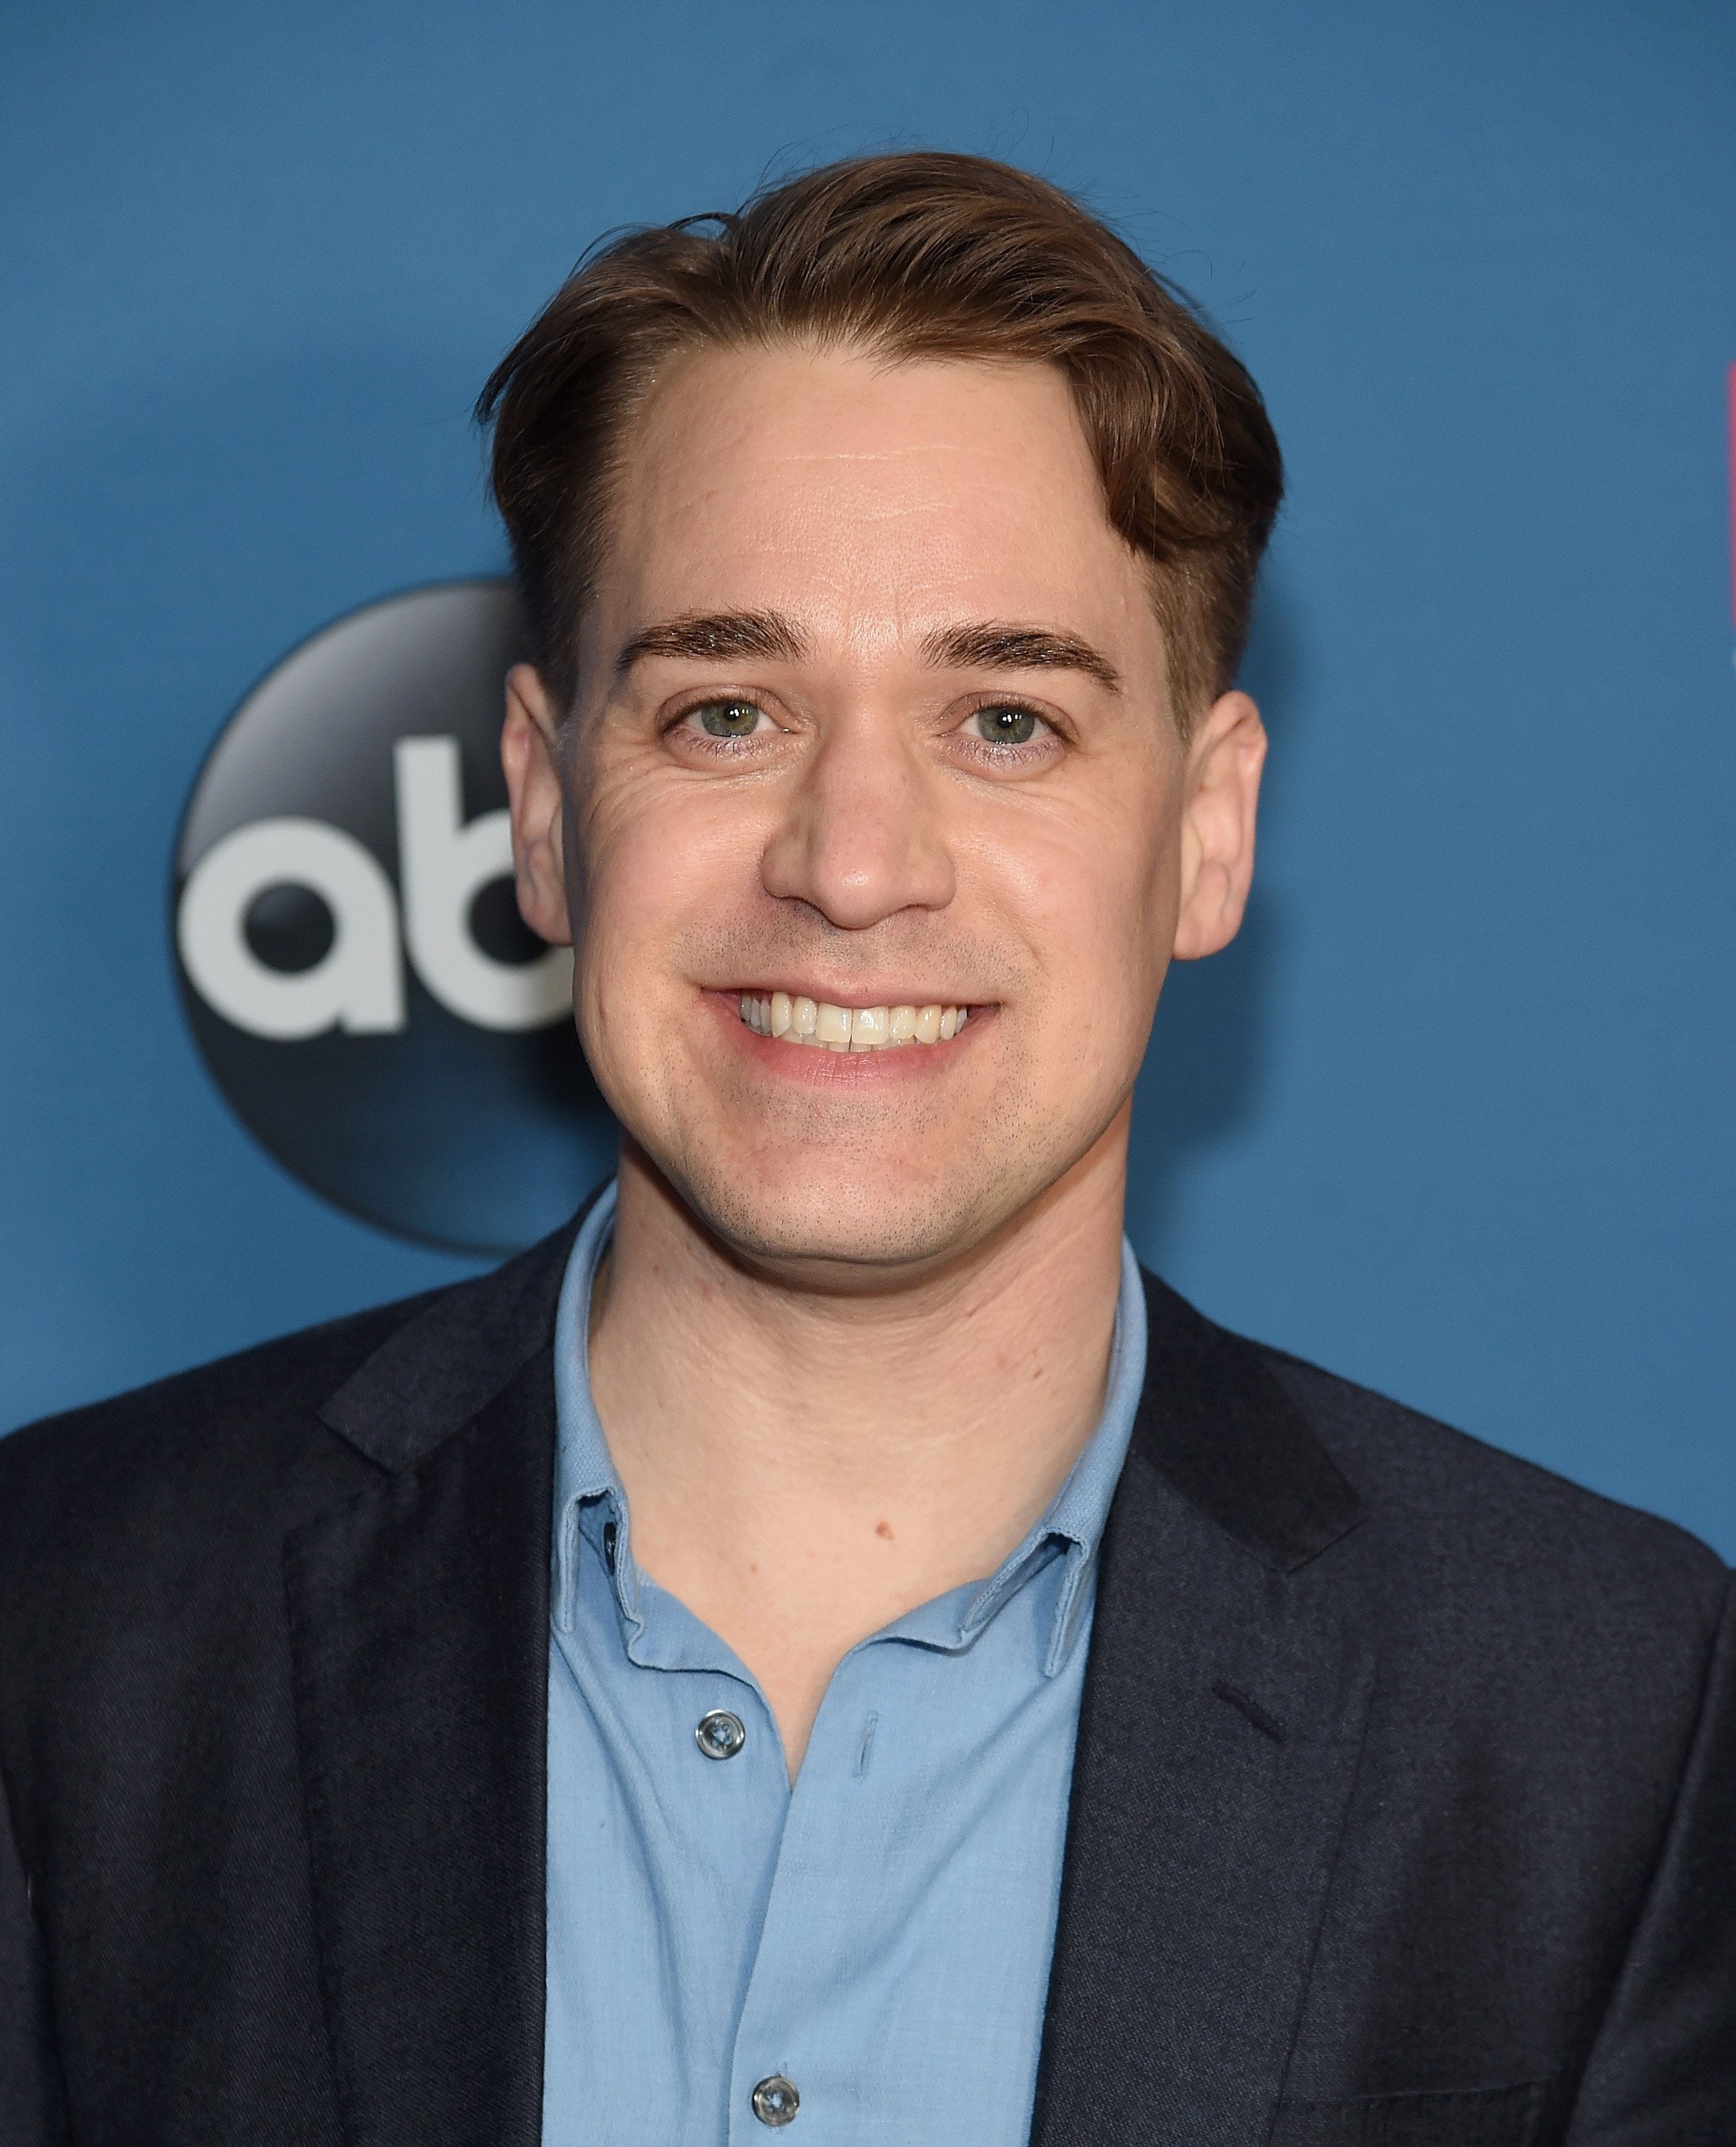 Theodore Raymond 'T.R.' Knight attending an ABC event while wearing a blue shirt and black blazer.